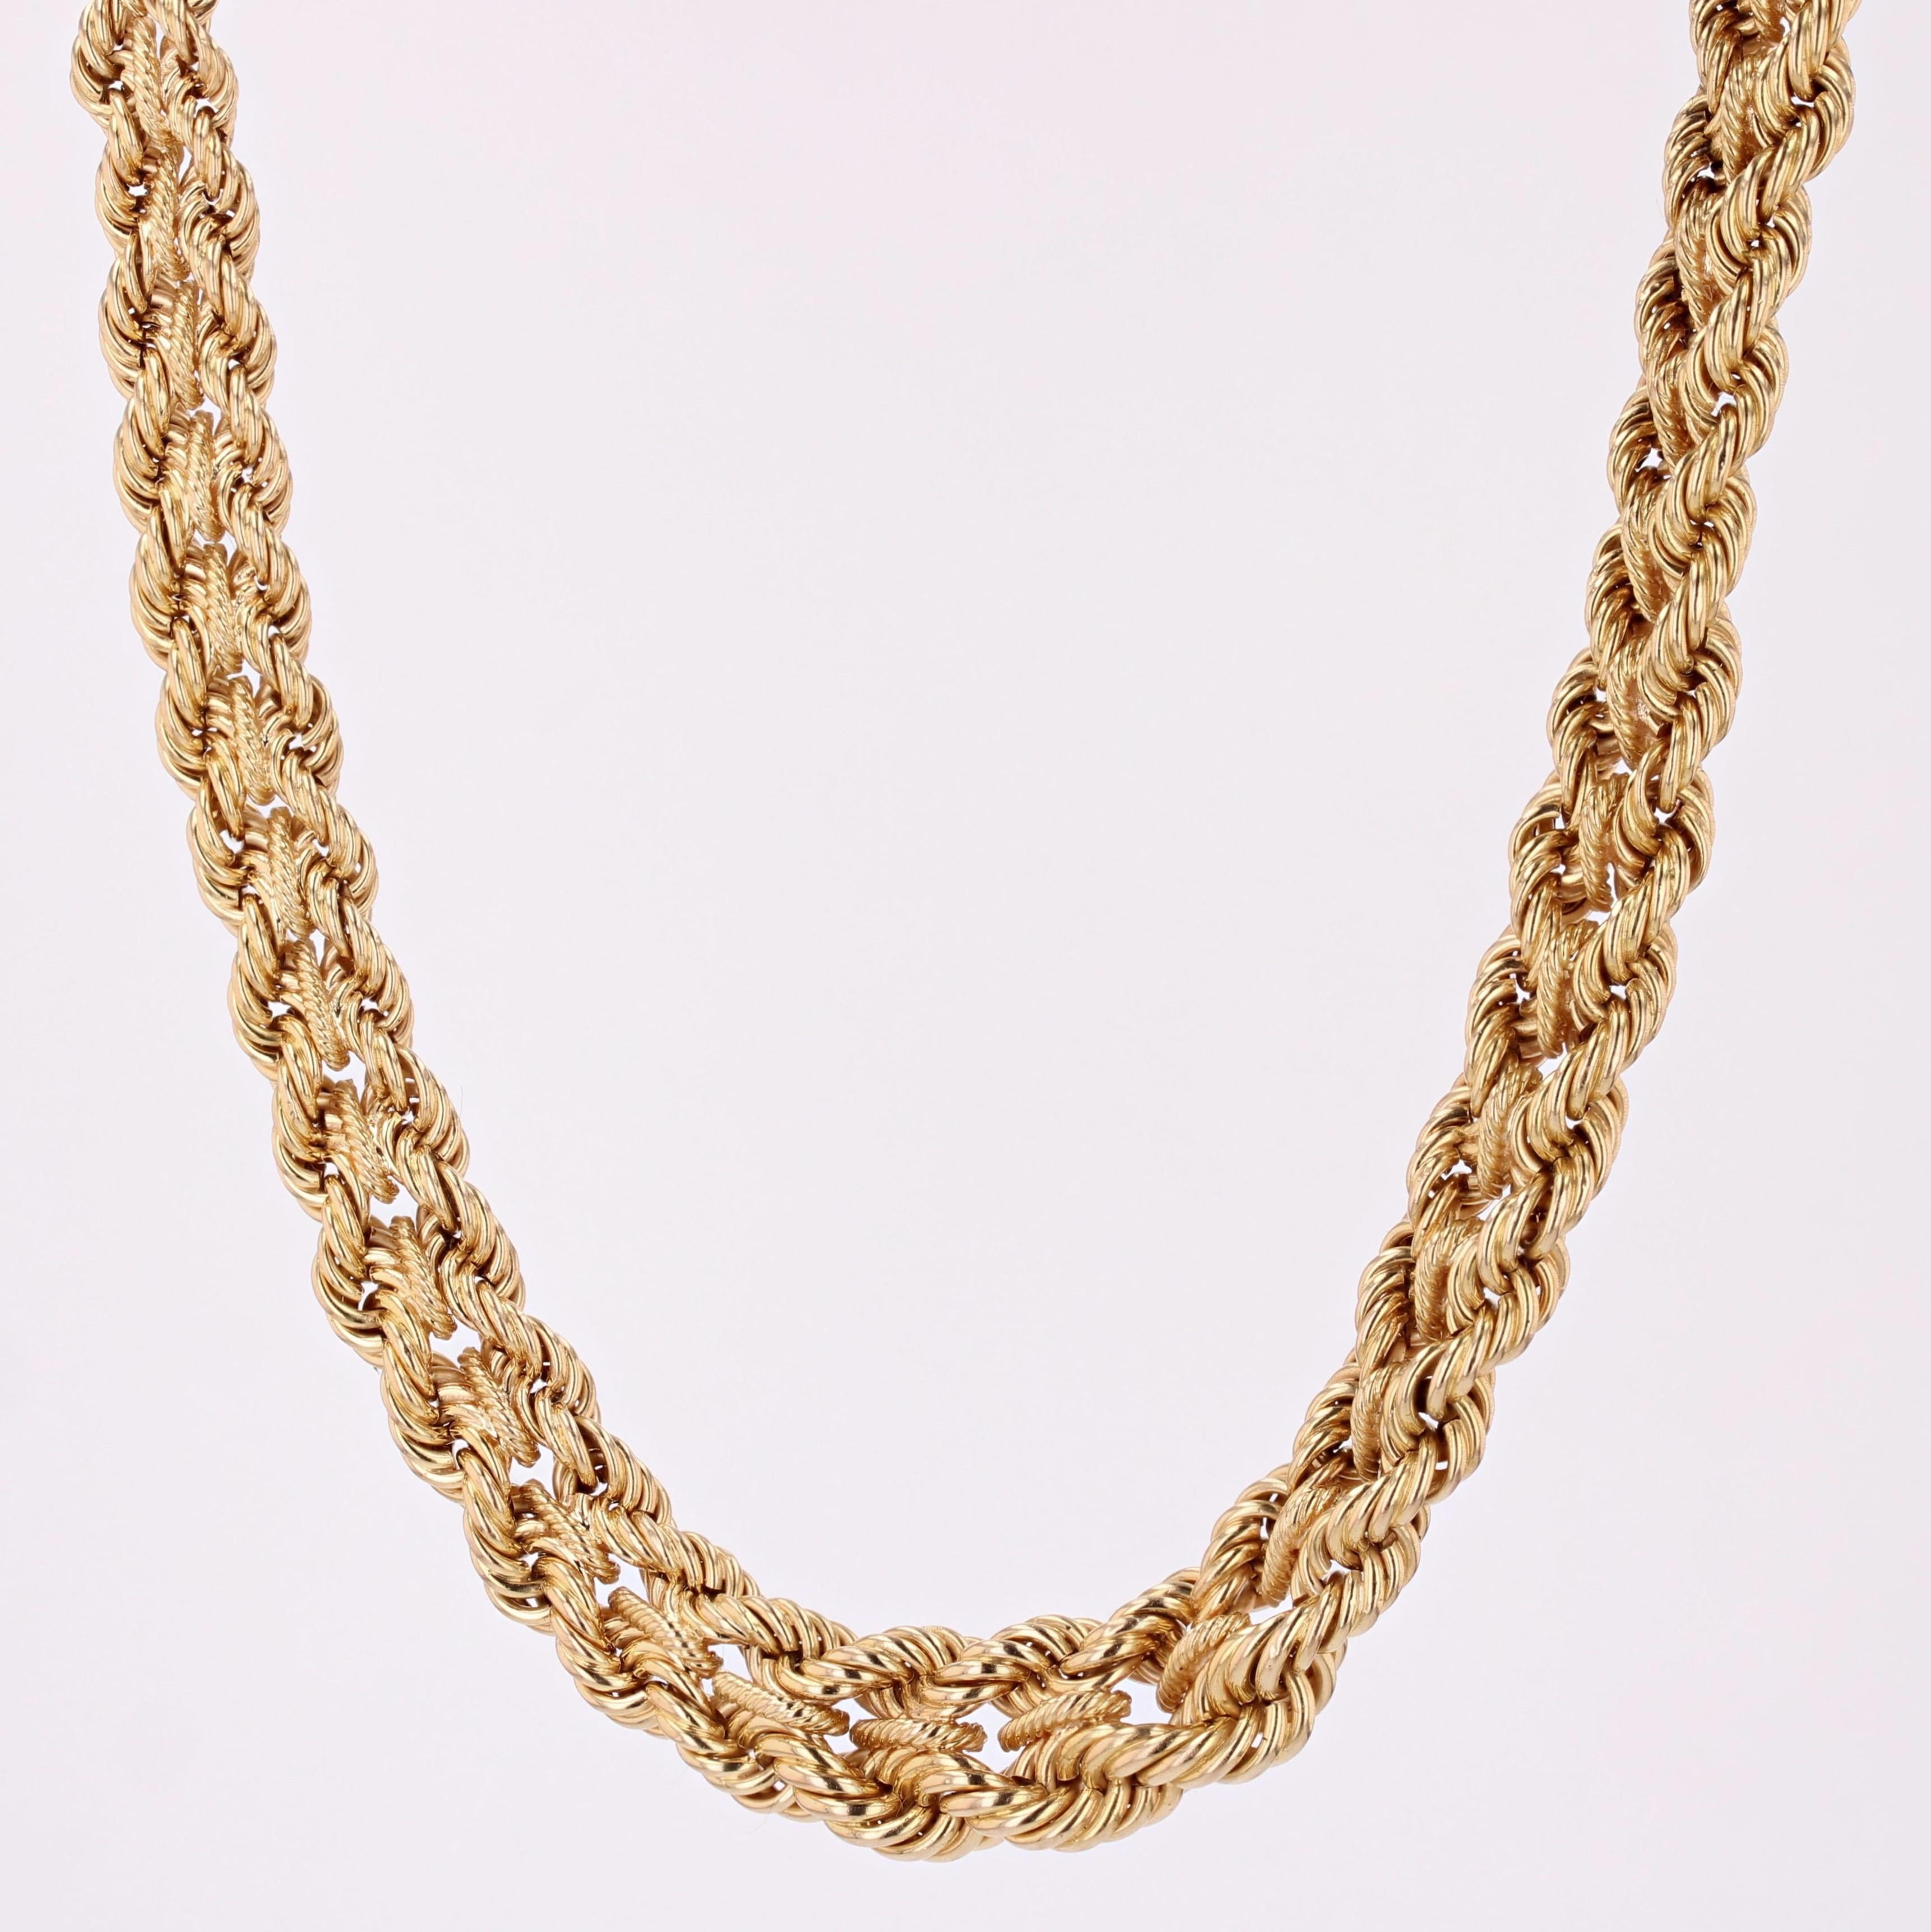 French 1950s 18 Karat Yellow Gold Falling Braided Choker Necklace For Sale 3